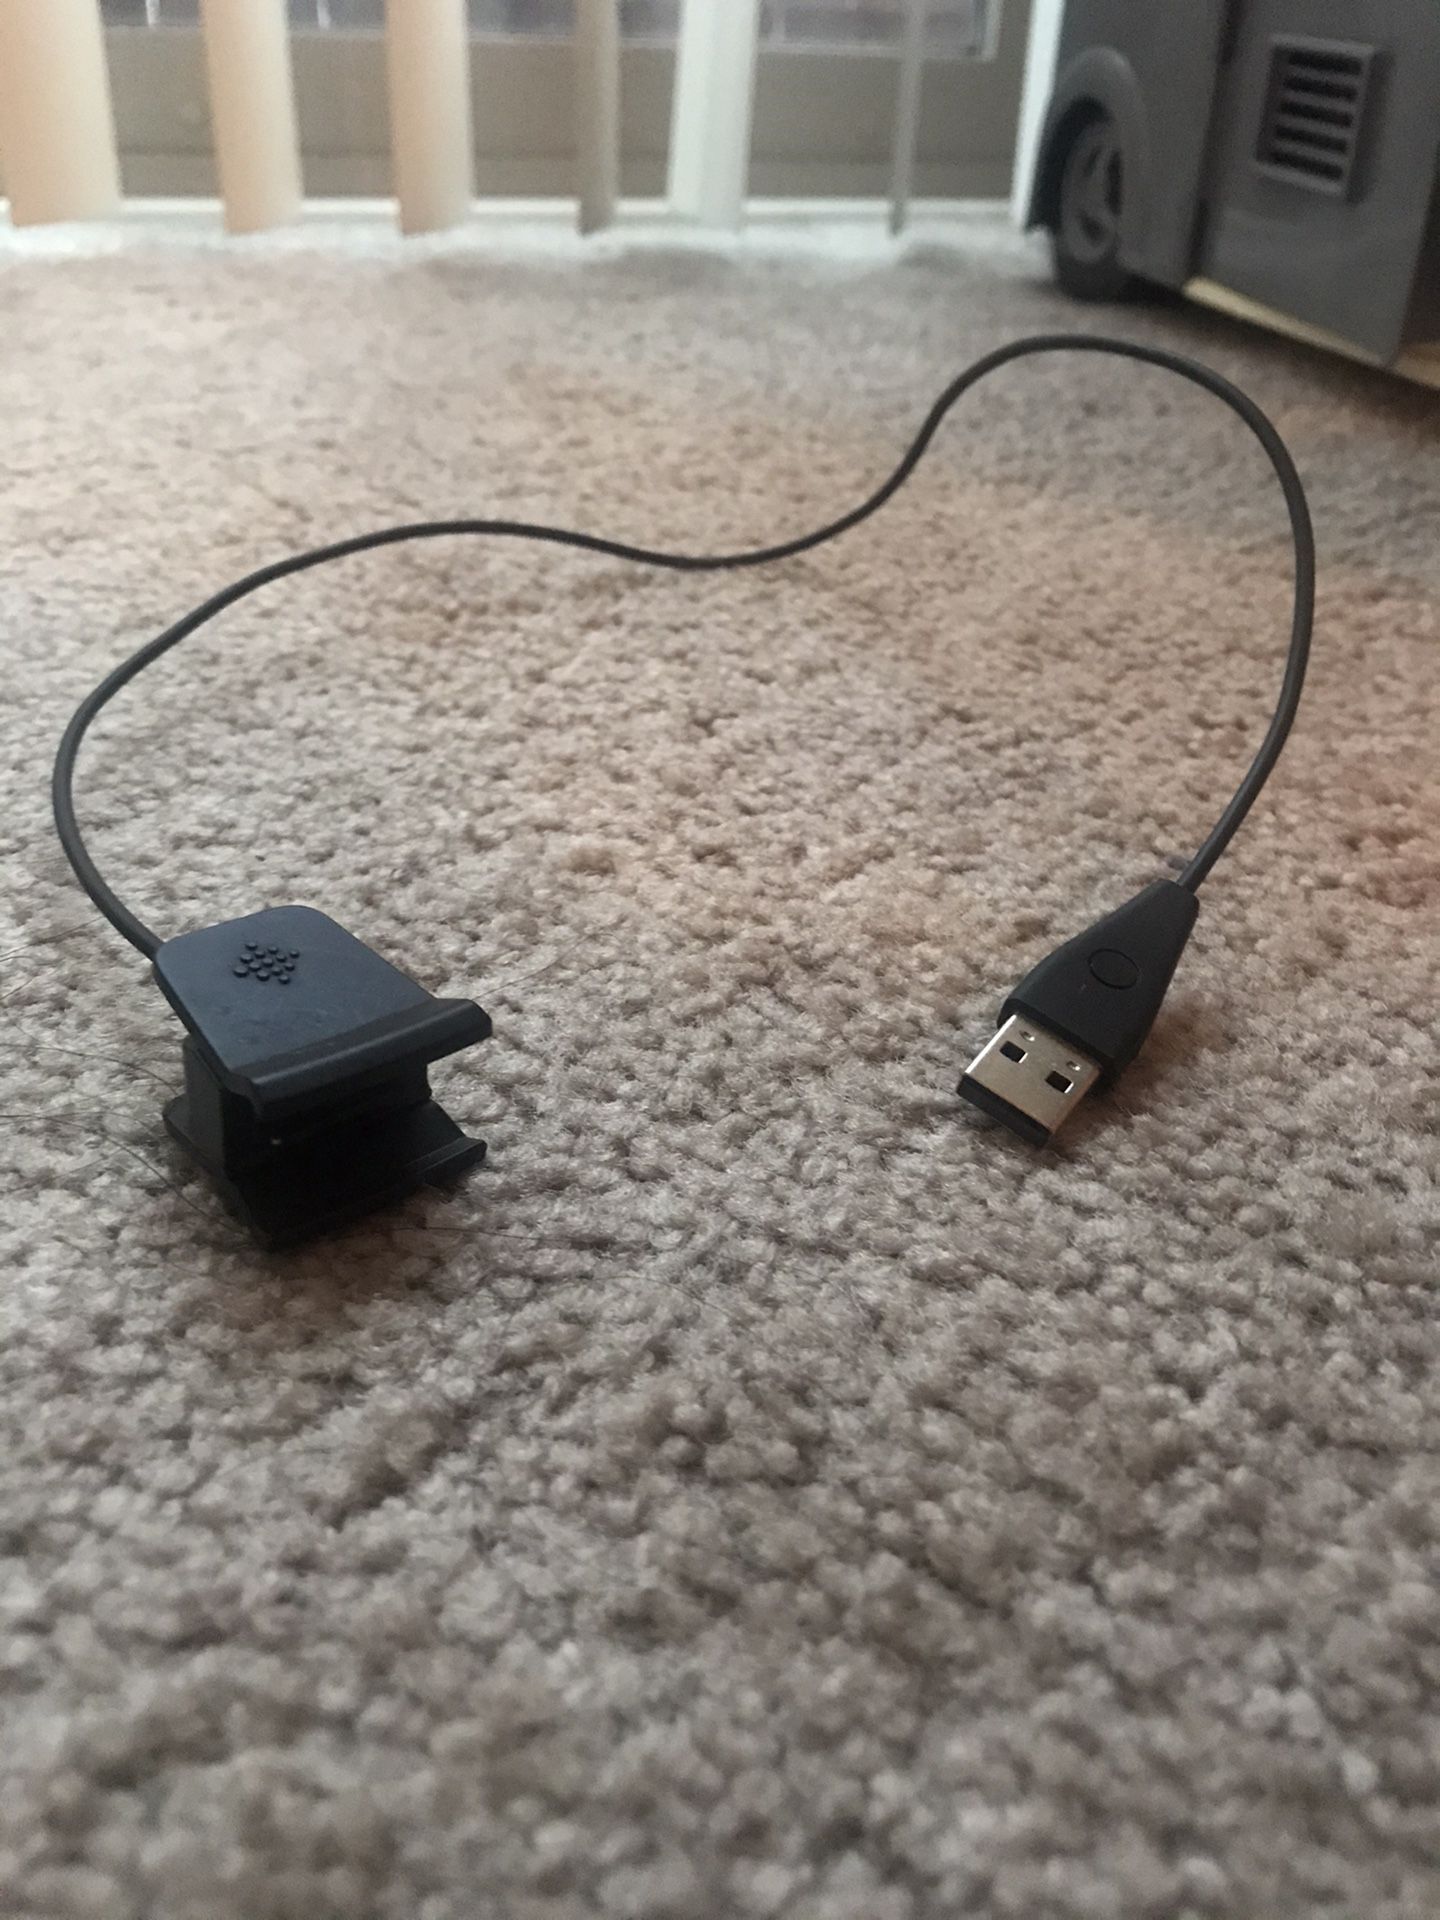 Charger for Fitbit Alta HR